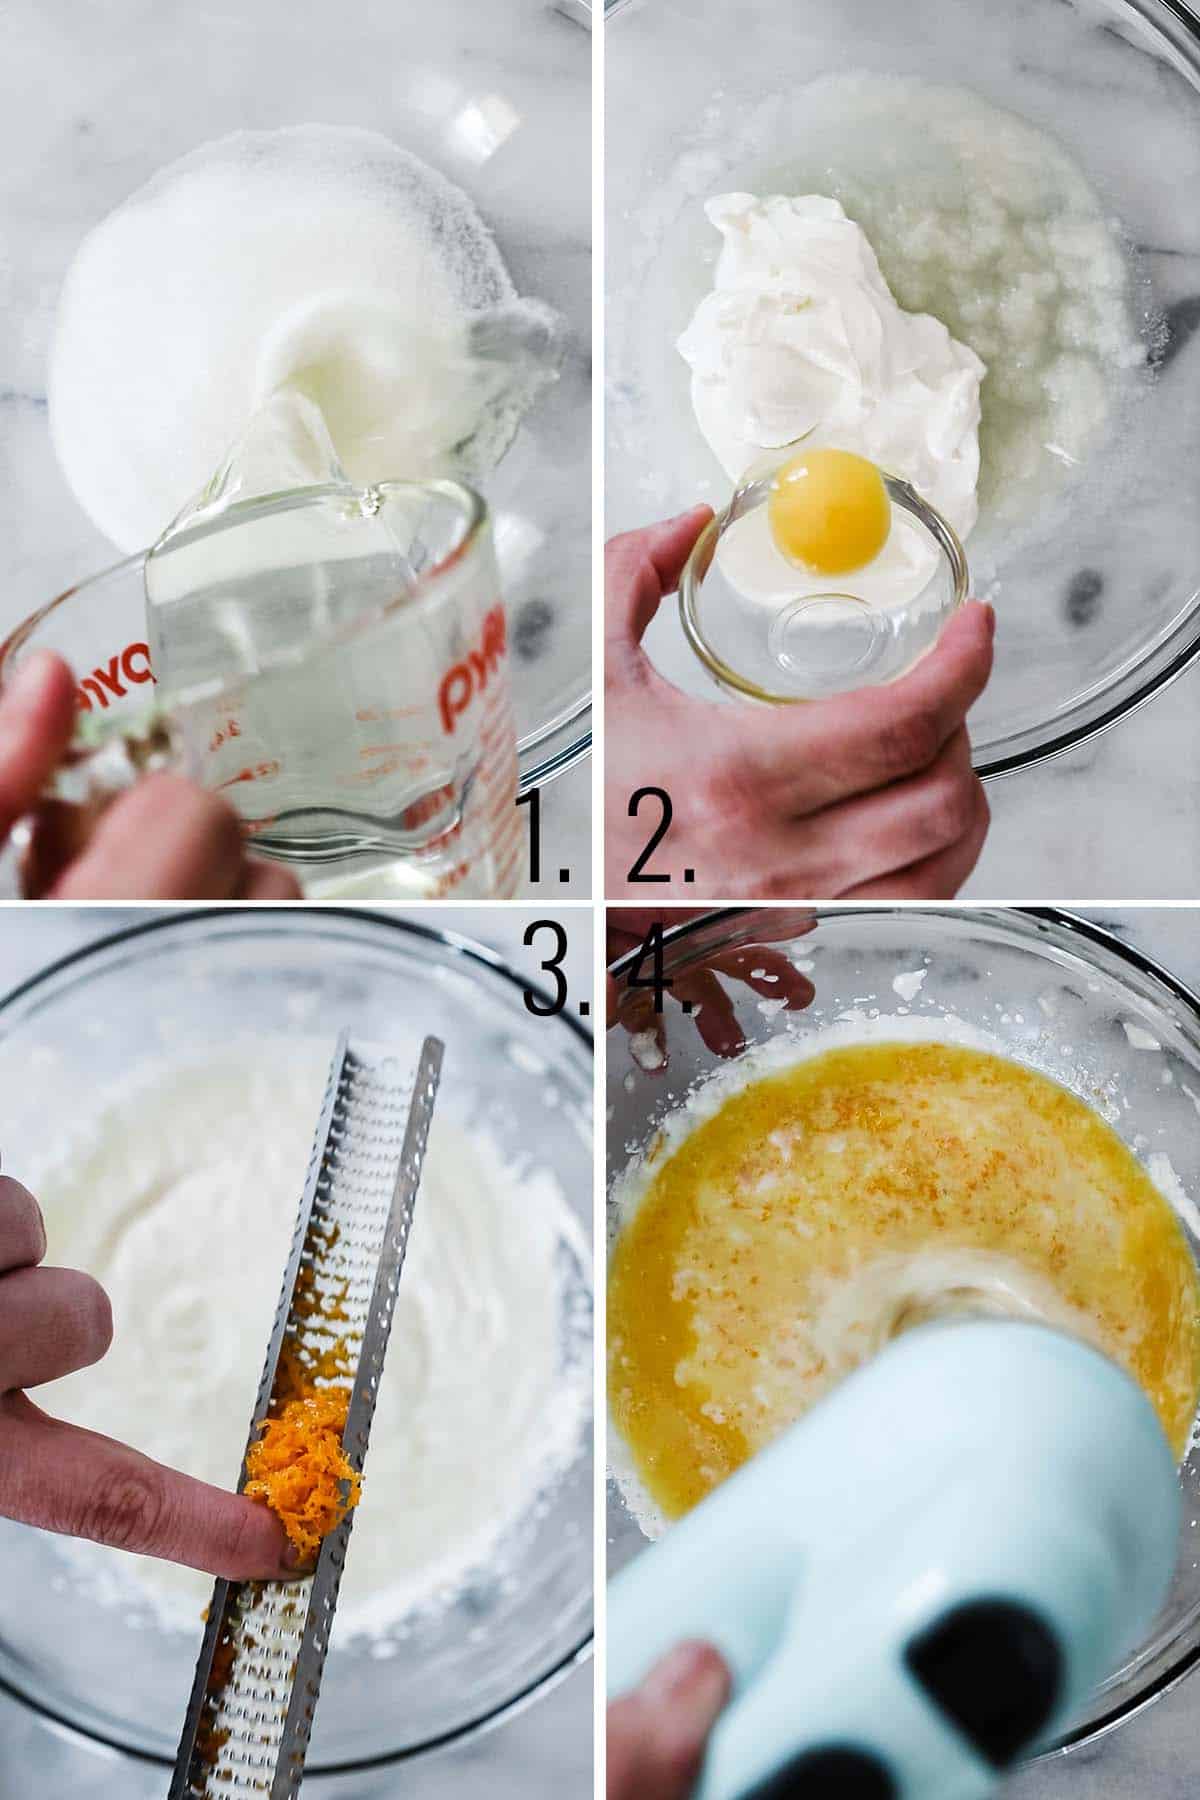 A collage of images showing how to make orange bread batter.